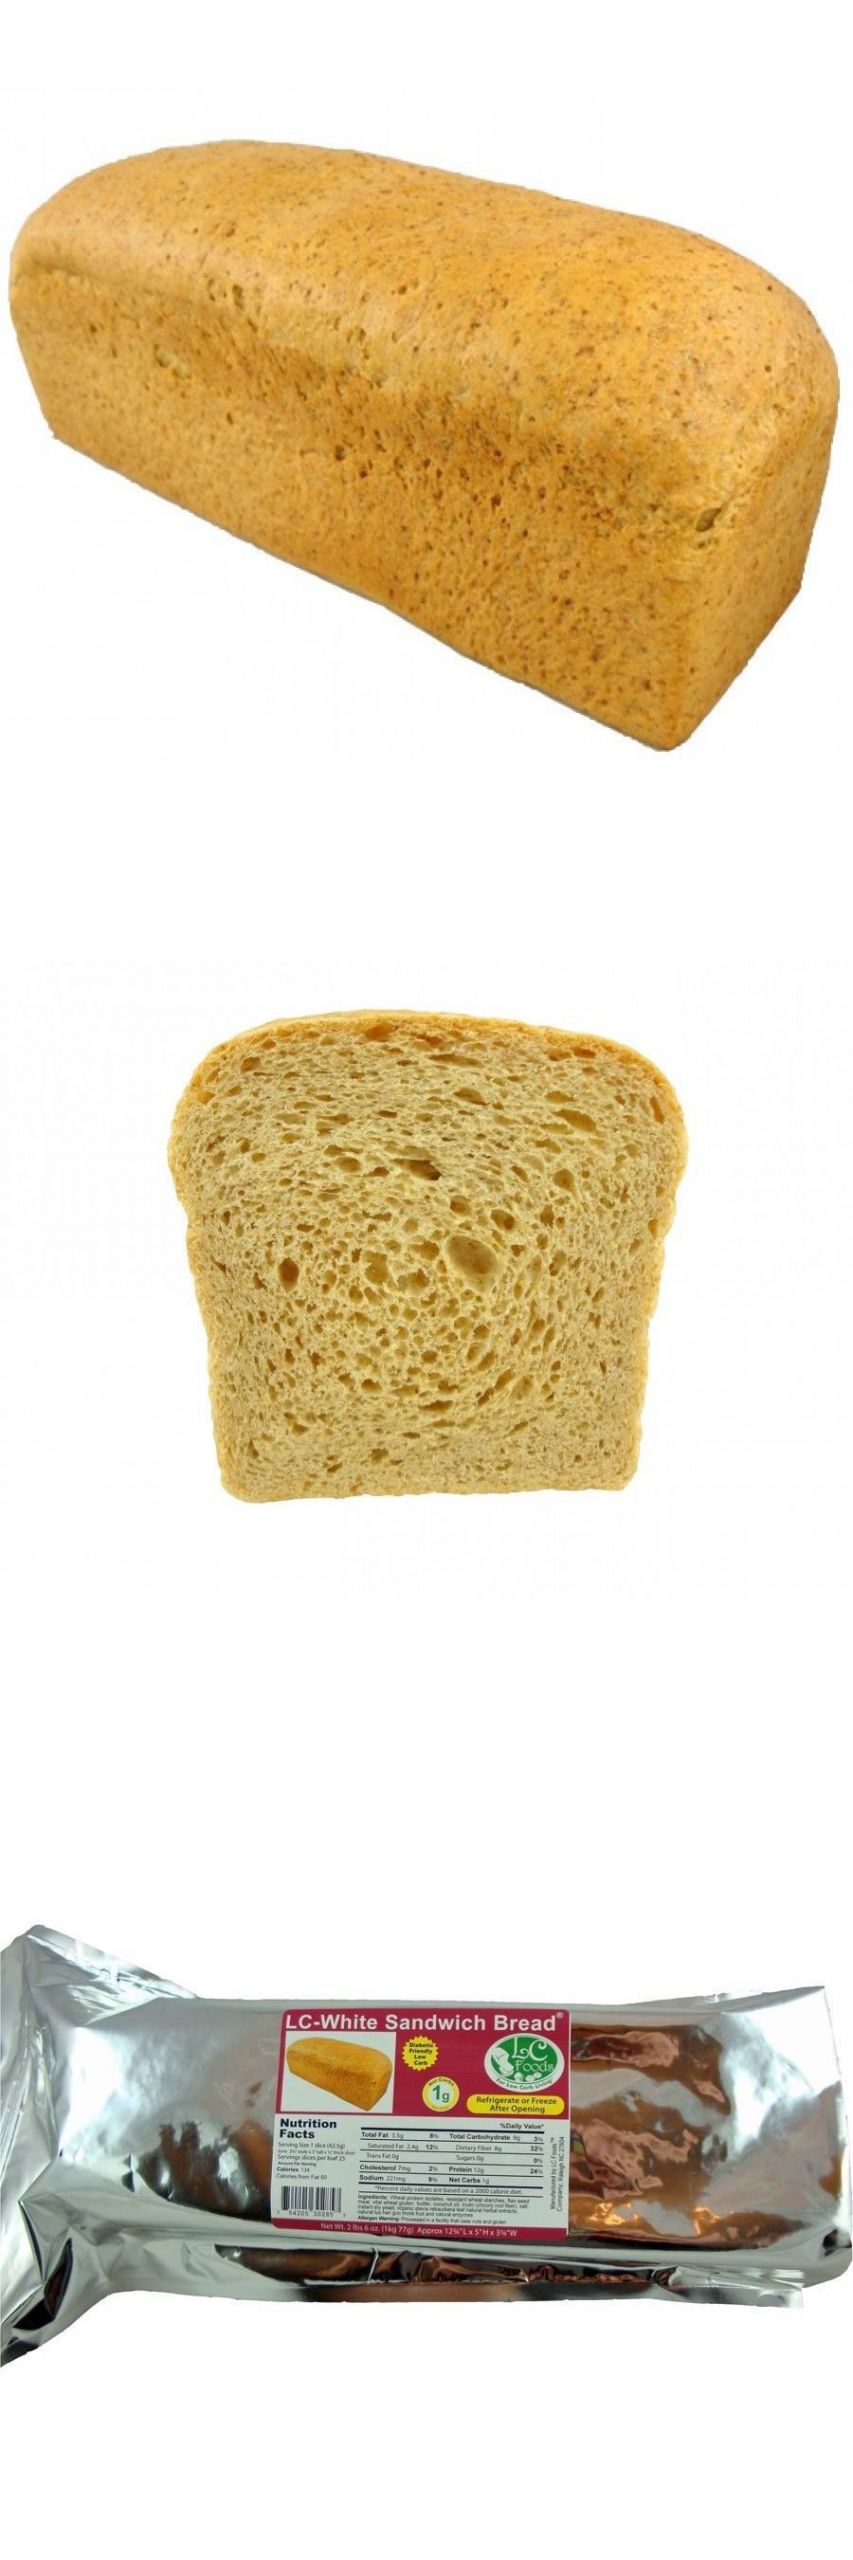 Low Carb Bread For Sale
 Bread Low Carb White Bread Fresh Baked BUY IT